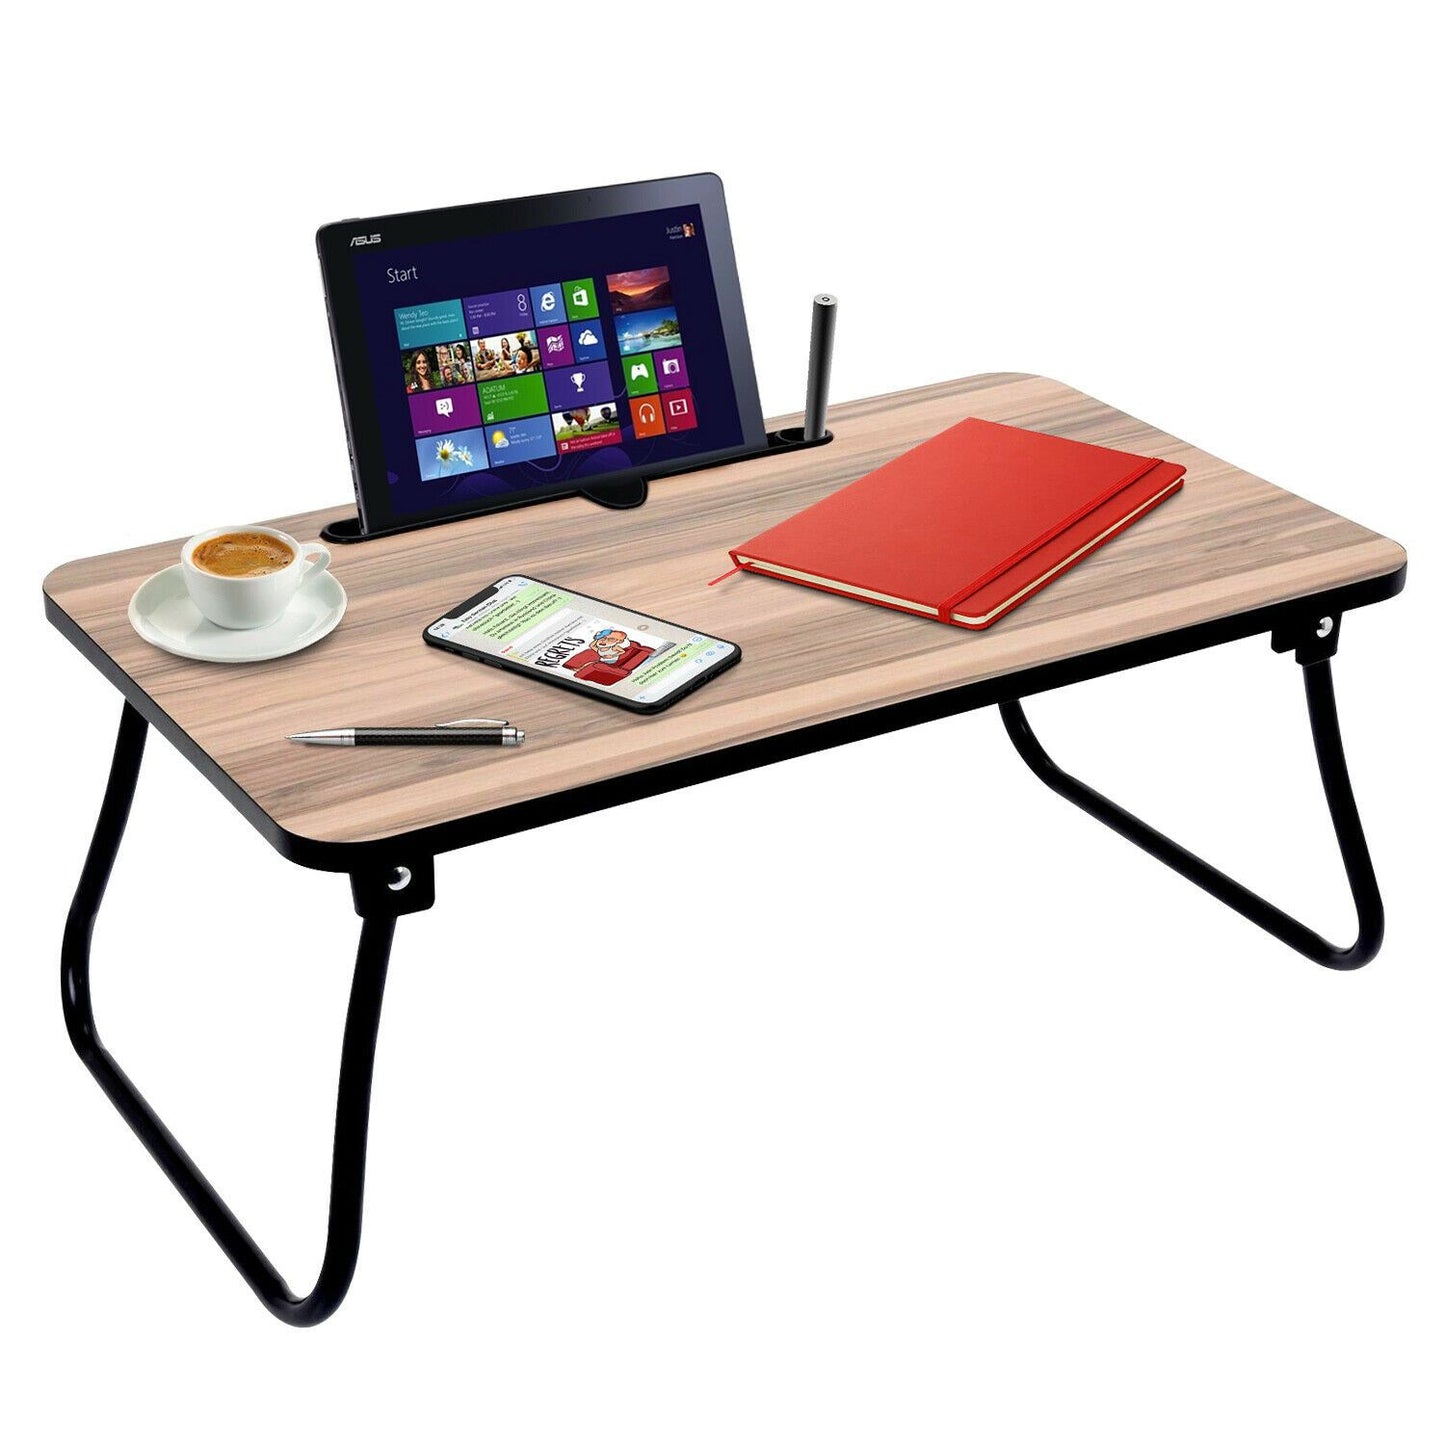 Foldable Laptop and Tablet Bed Table by Geezy - UKBuyZone